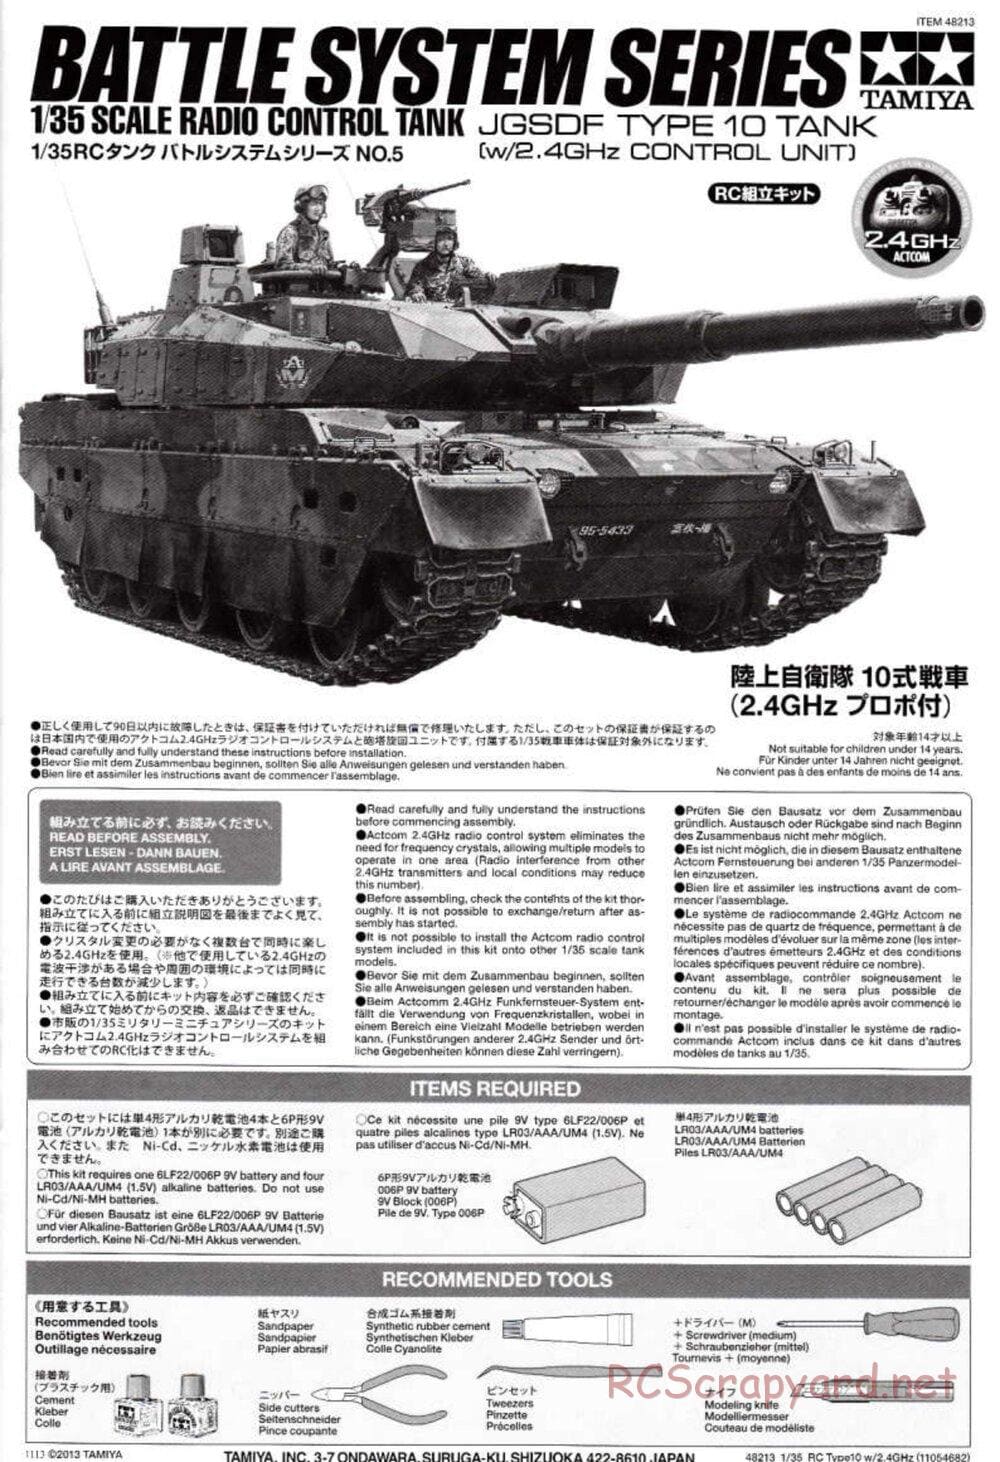 Tamiya - JGSDF Type 10 Tank - 1/35 Scale Chassis - Manual - Page 1